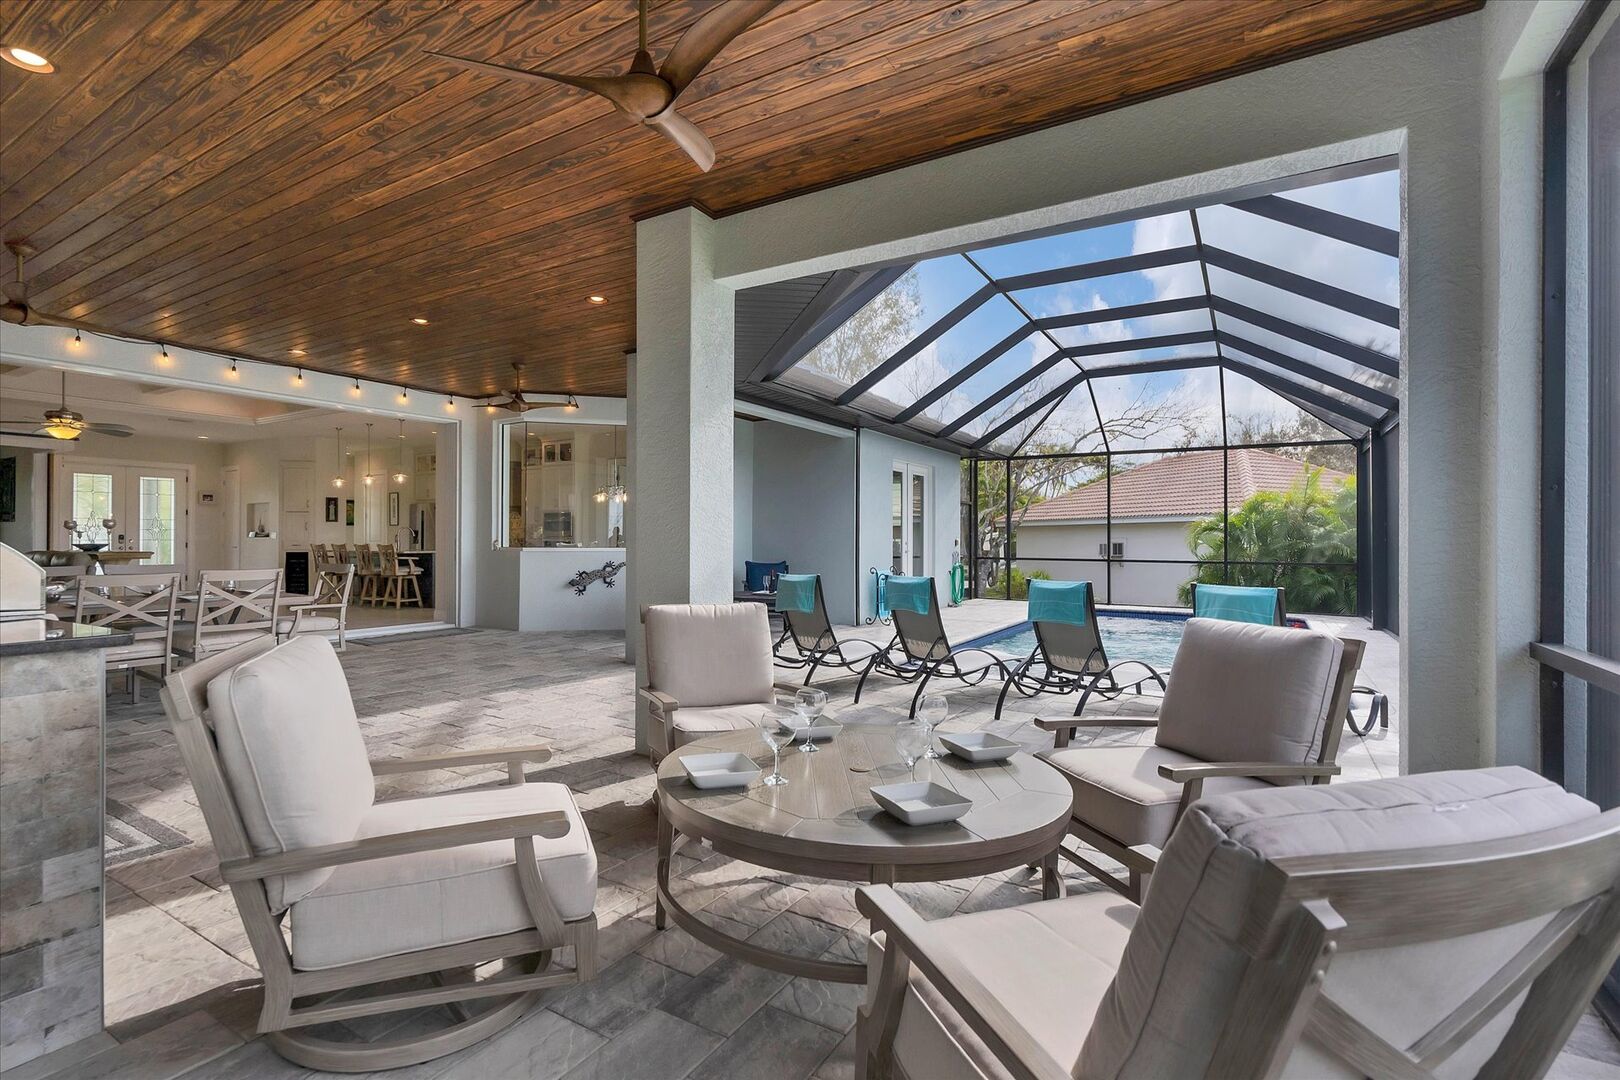 Incredible lanai overlooking canal with outdoor dining, kitchen, fire pit table, and sparkling pool